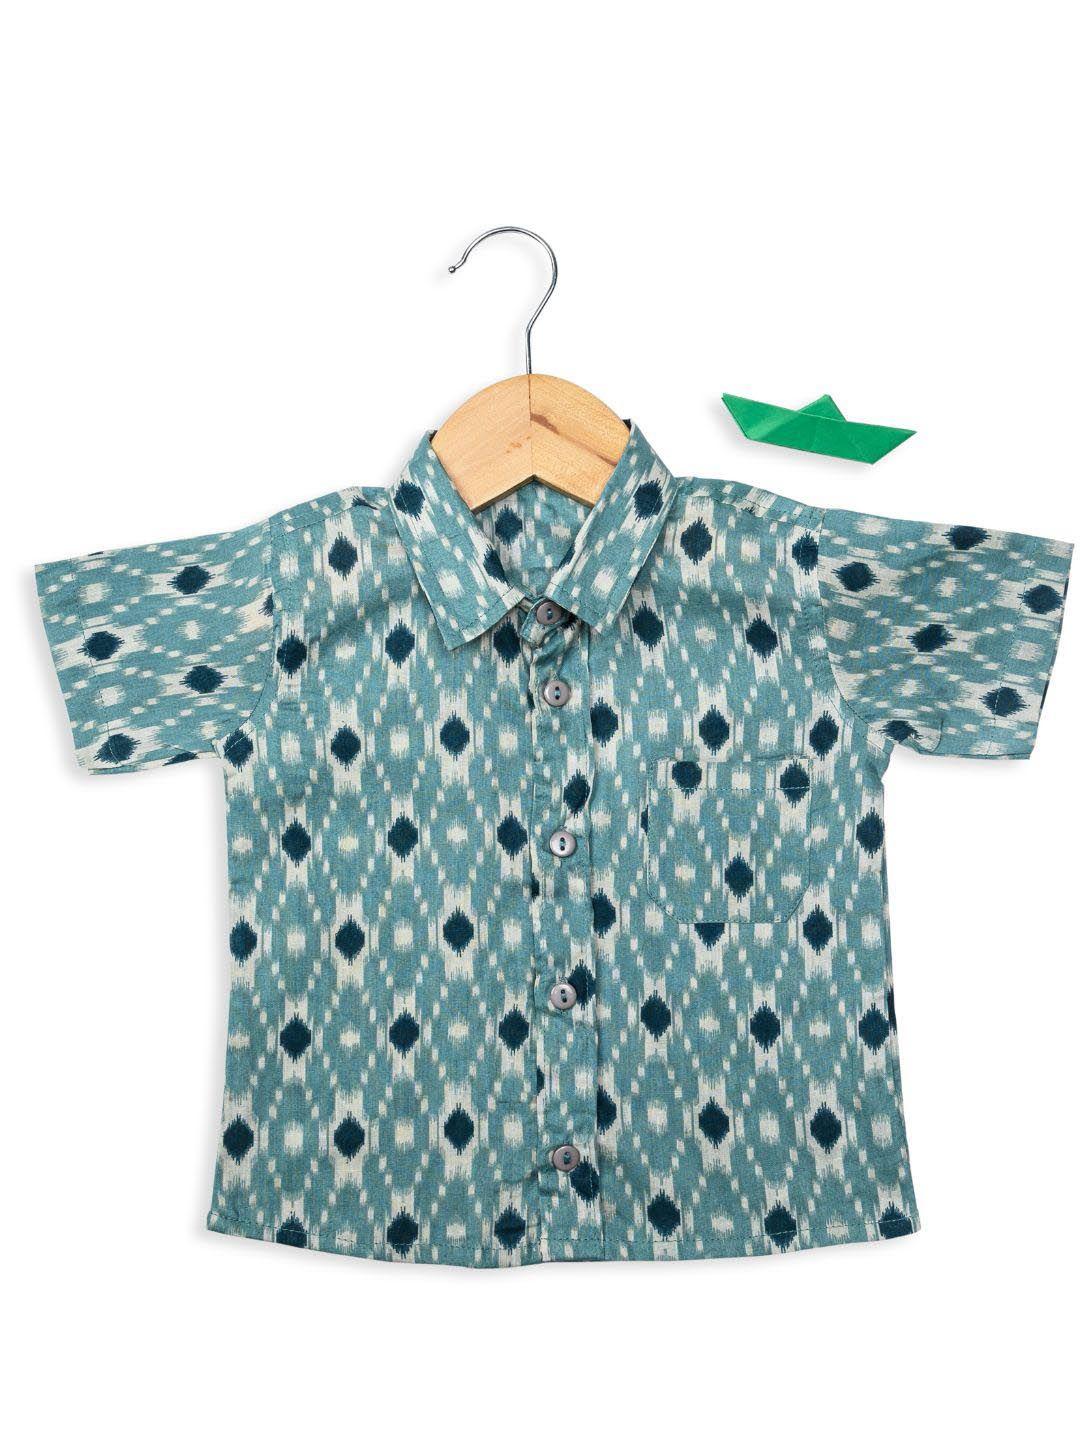 baesd boys relaxed abstract printed organic cotton casual shirt